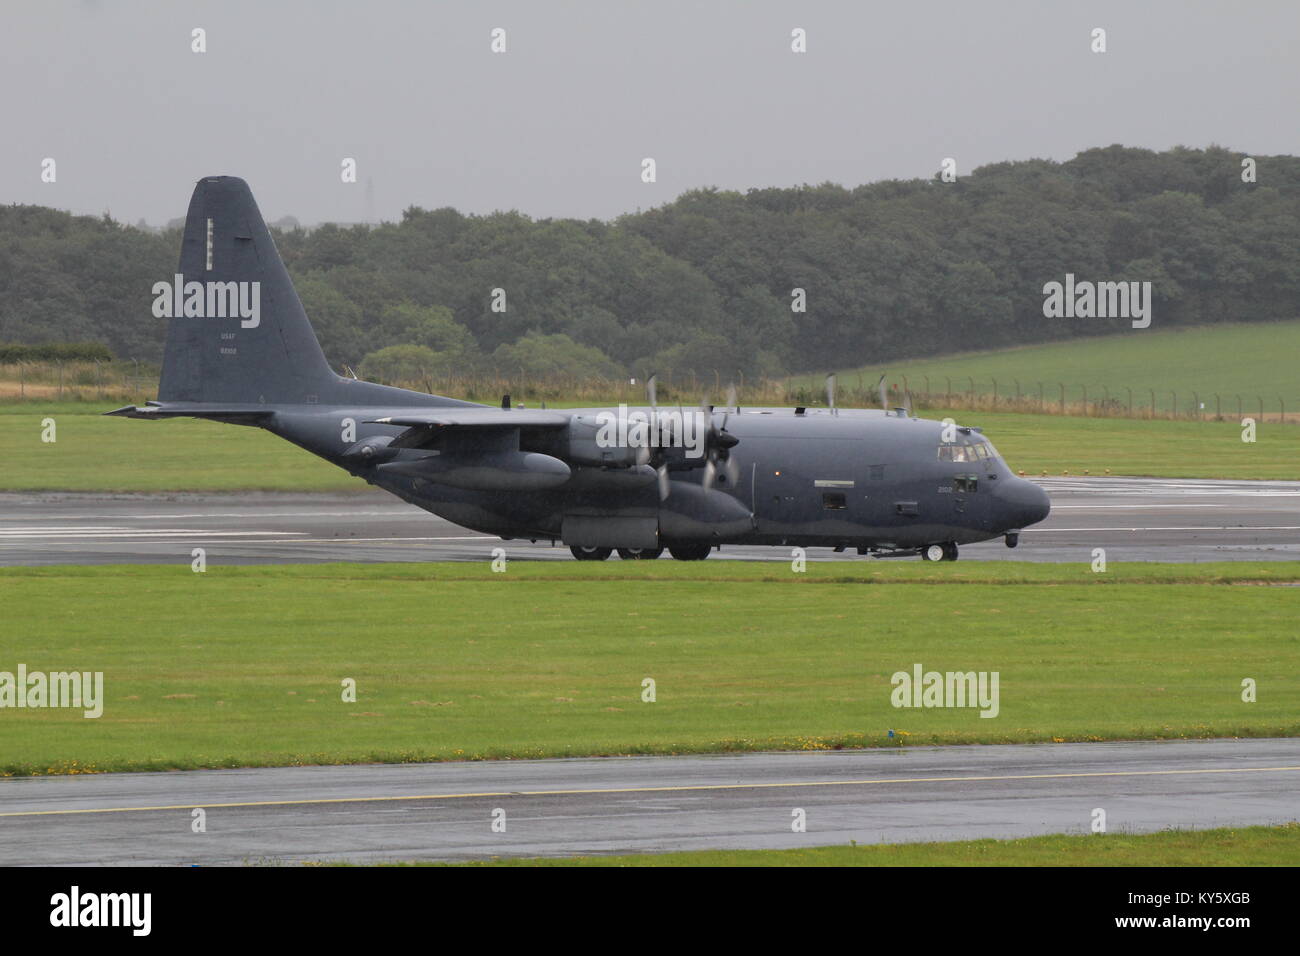 88-2102, a Lockheed HC-130N Hercules (Combat King) operated by the United States Air Force, at Prestwick Airport in Ayrshire. Stock Photo